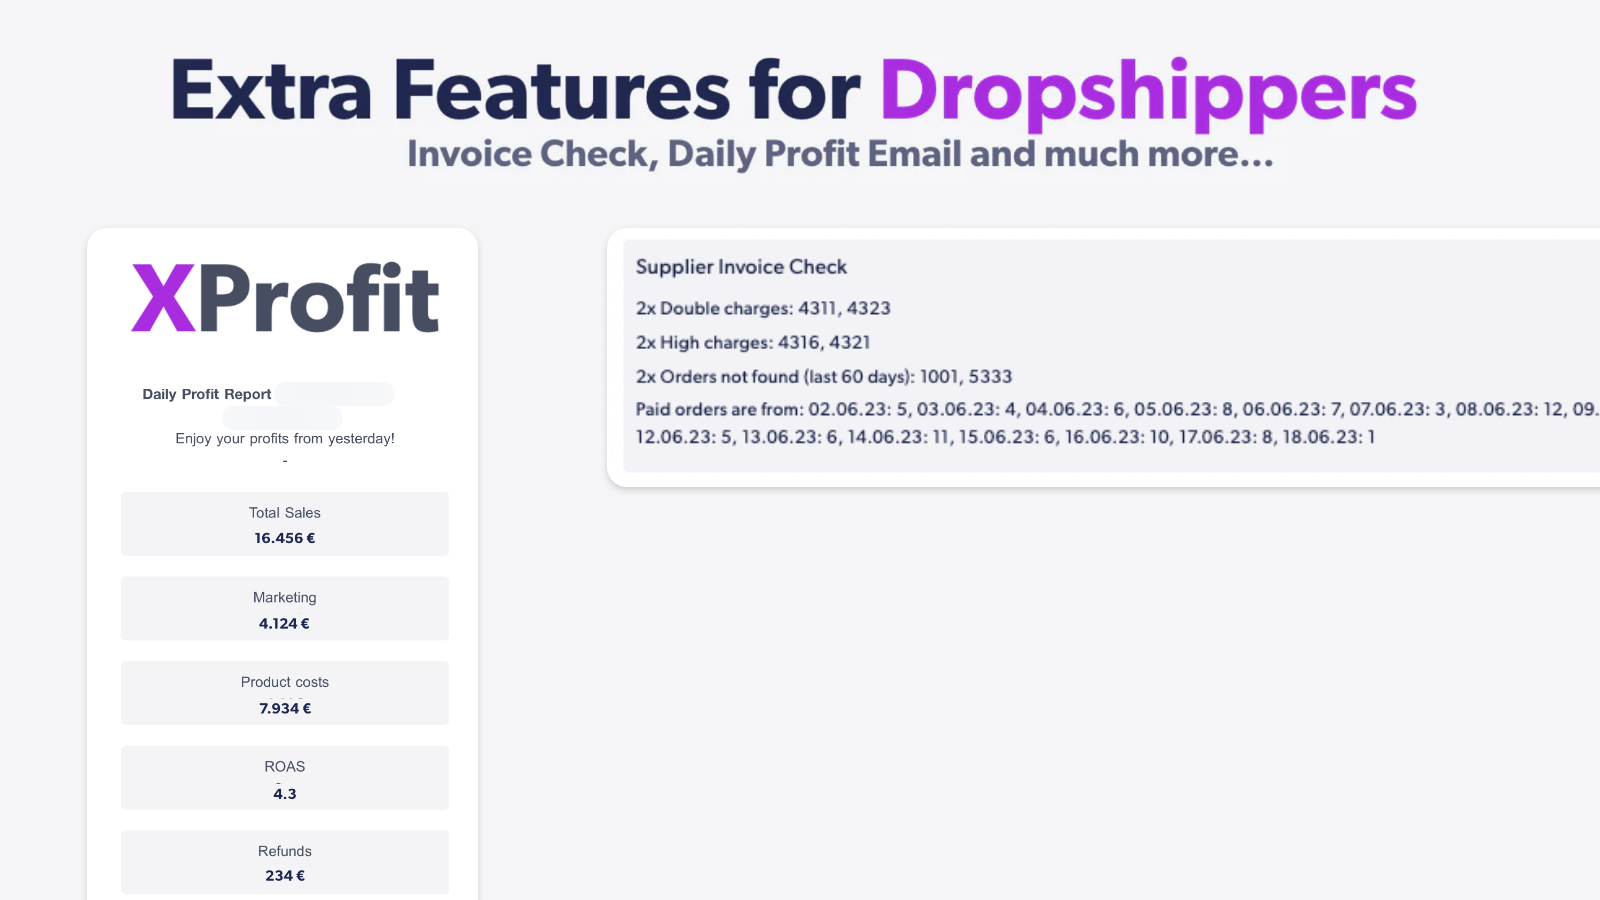 Extra features for Dropshippers